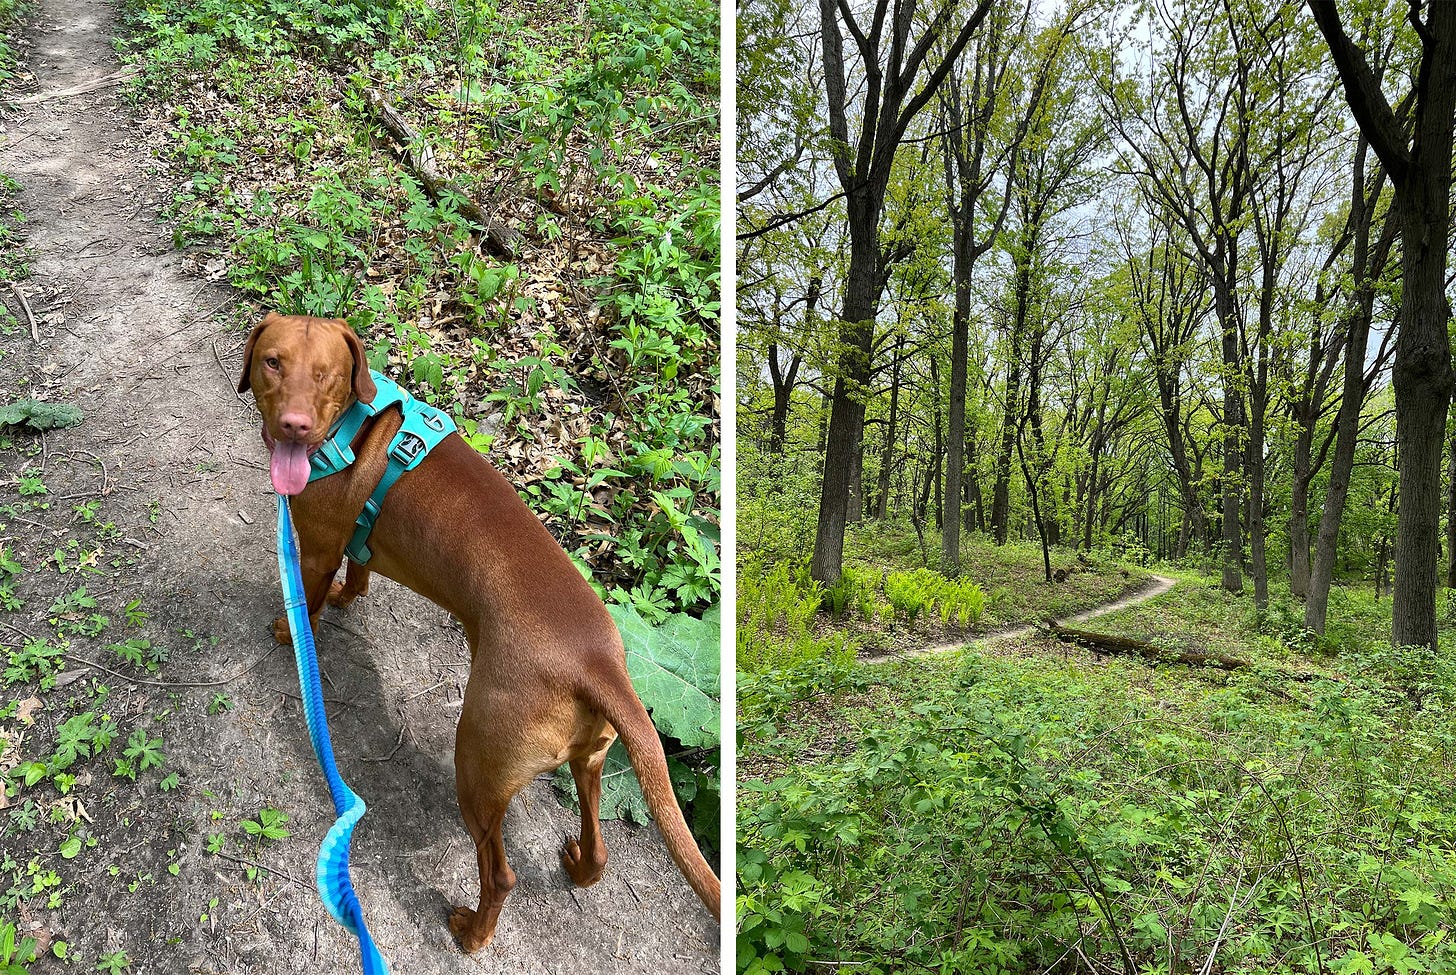 One-eyed vizsla, Leif, in an enchanted forest.